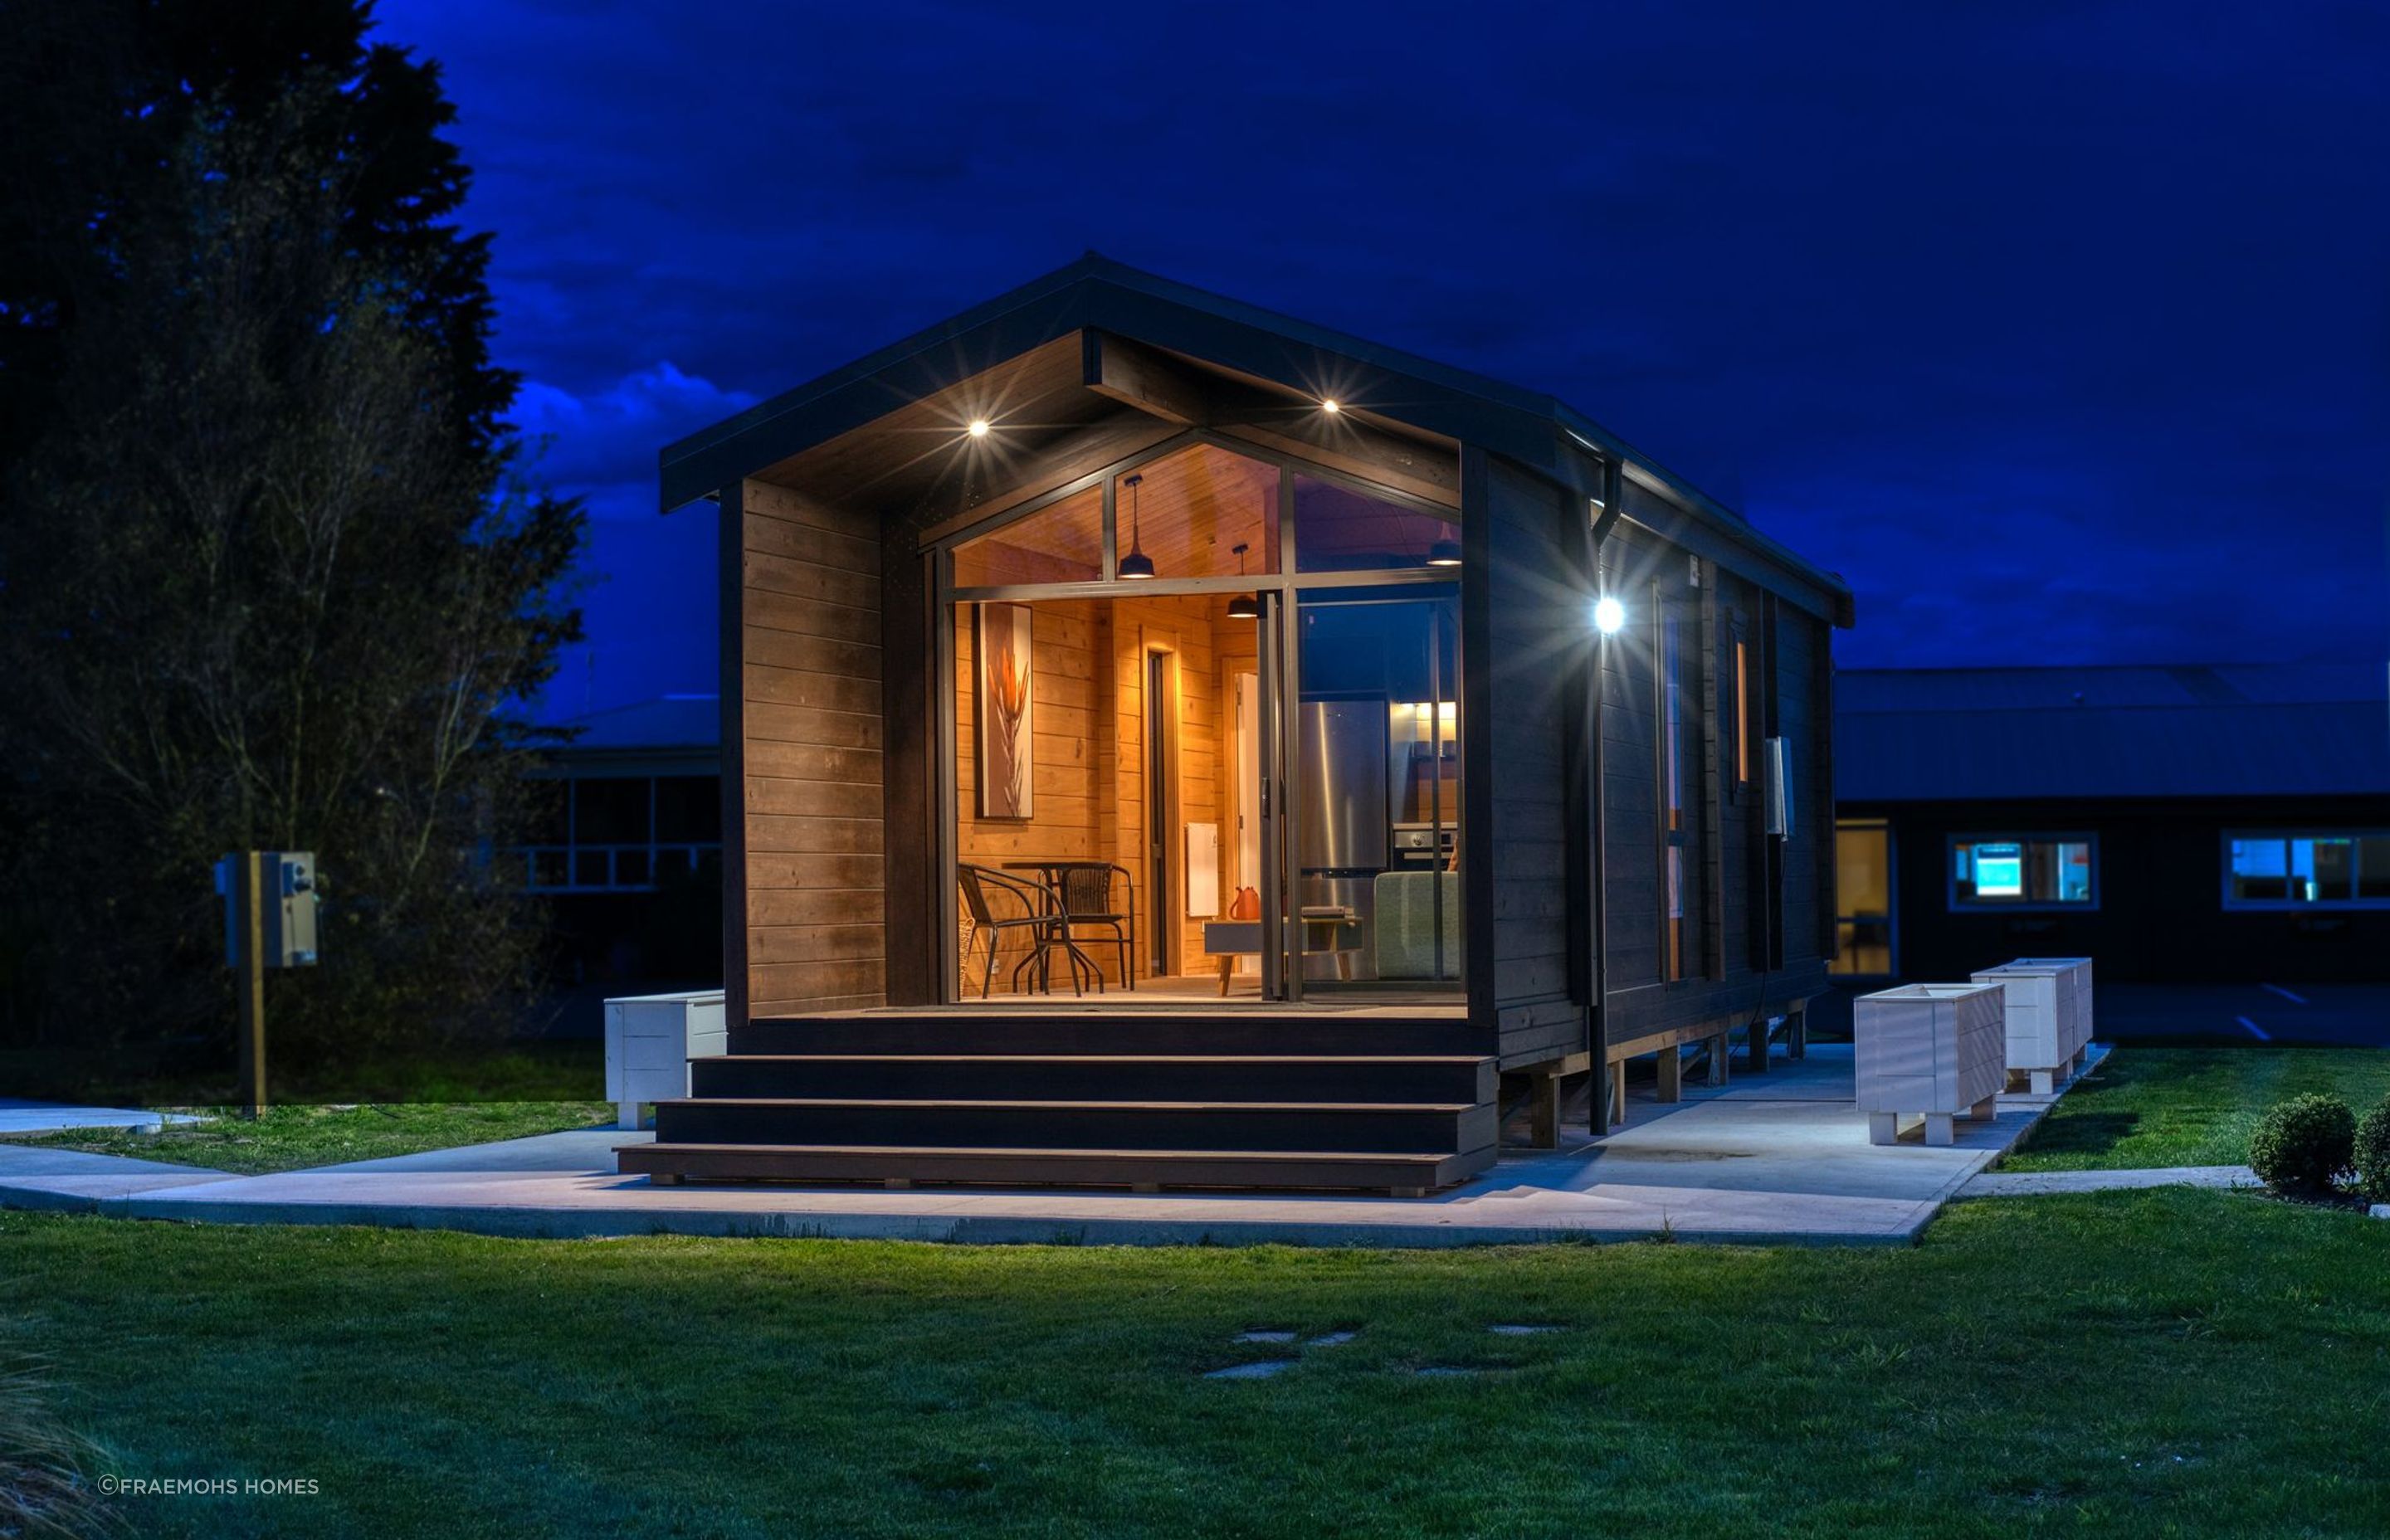 Producing a stunning tiny home like this transportable 'Mackenzie' Timber Home takes a lot of preparation and planning.